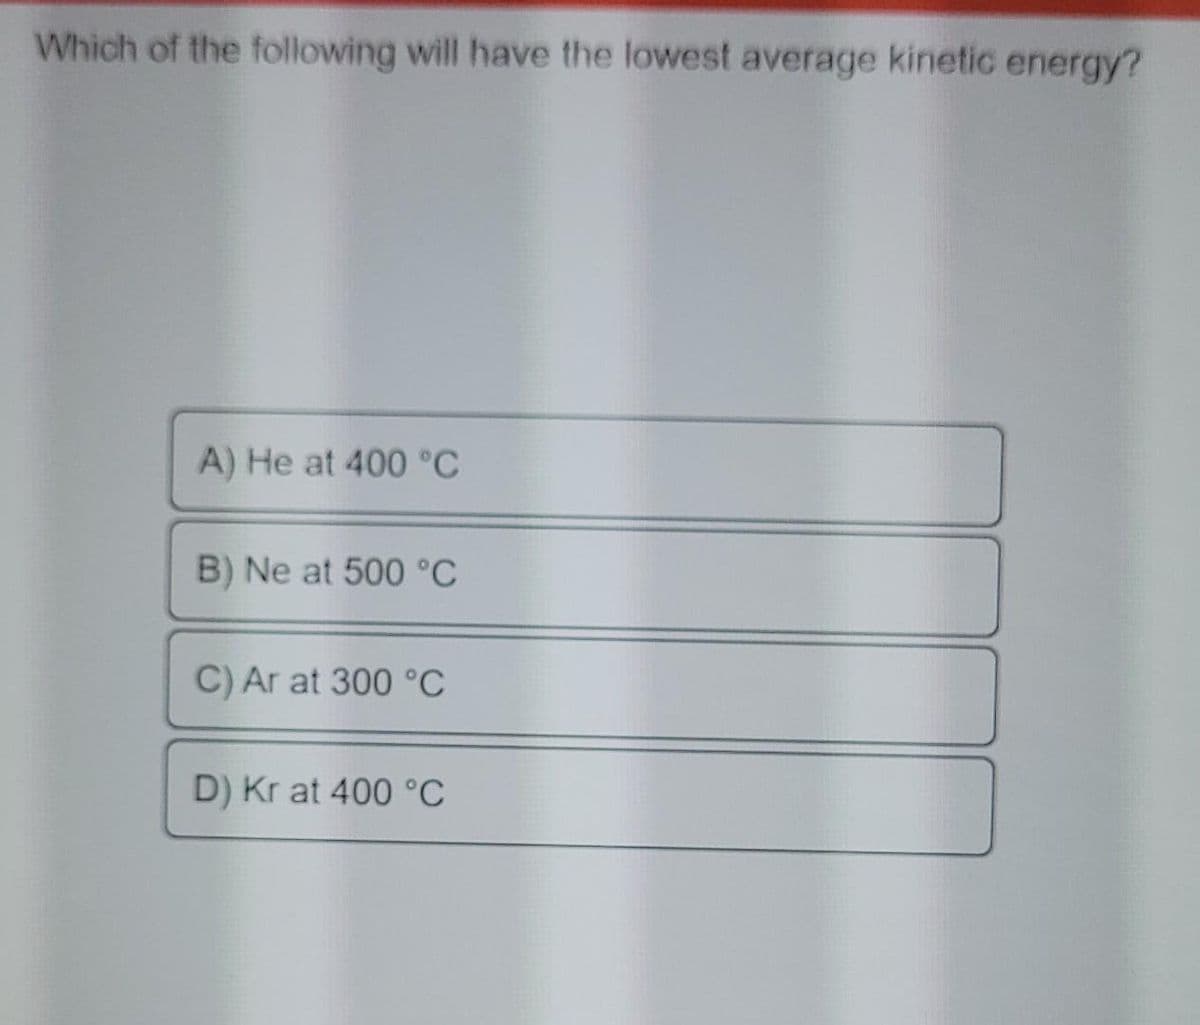 Which of the following will have the lowest average kinetic energy?
A) He at 400 °C
B) Ne at 500 °C
C) Ar at 300 °C
D) Kr at 400 °C
